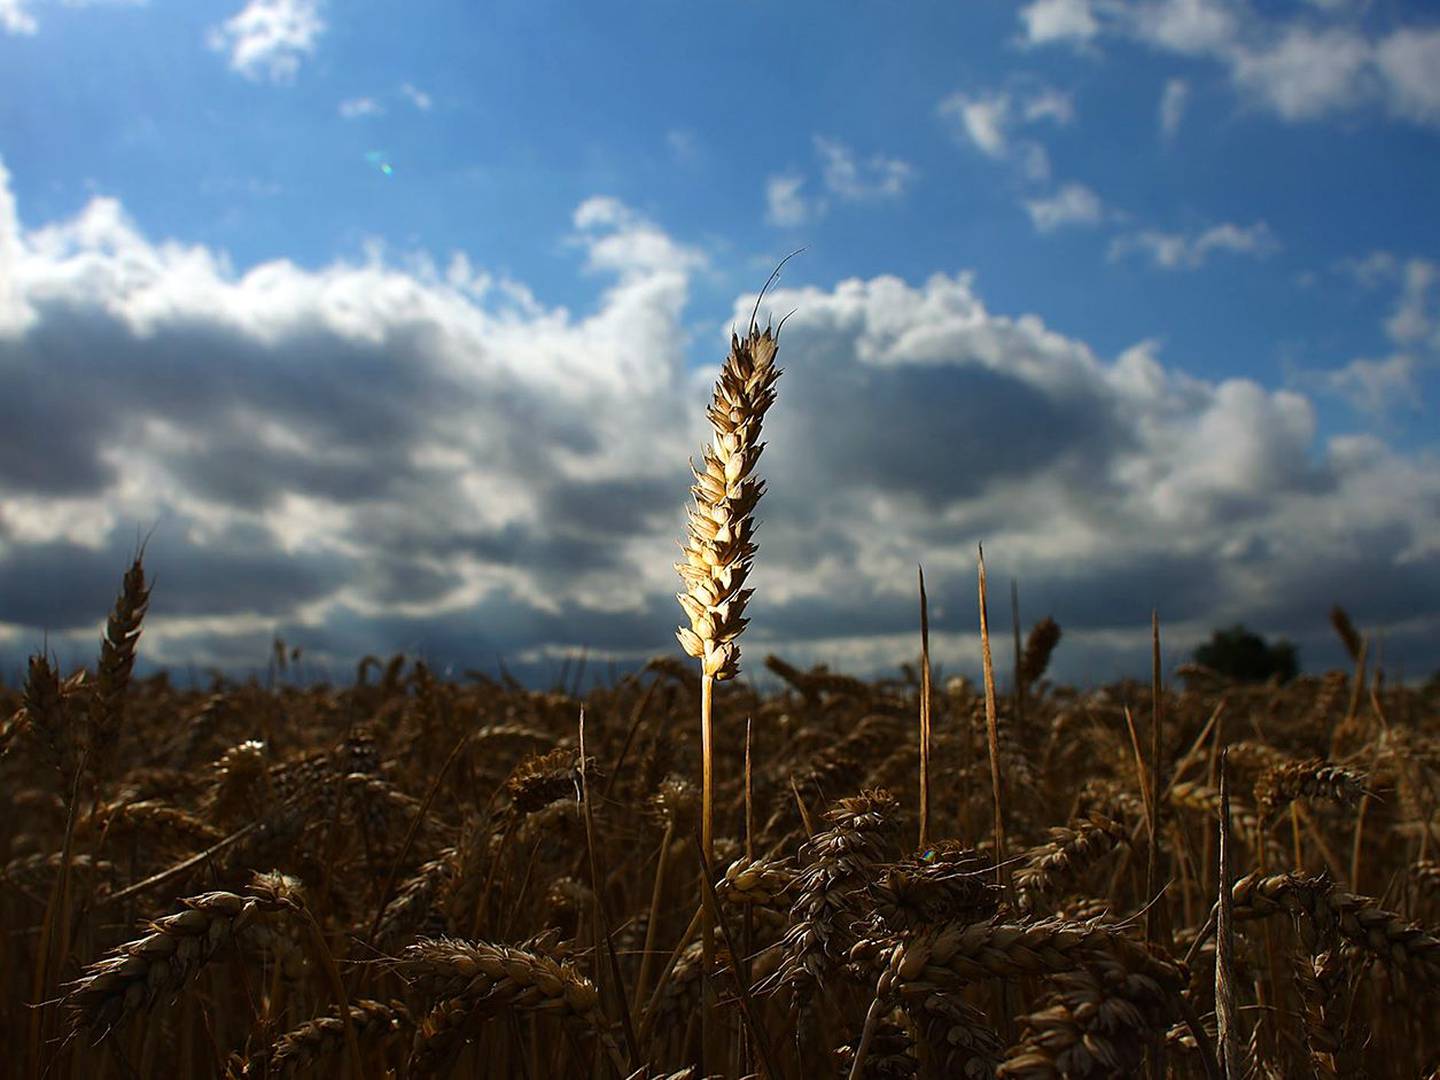 STAFFORD, UNITED KINGDOM - AUGUST 09: Ripe wheat waits to be harvested in fields at the start of harvesting on August 9, 2010 in Chebsey near Stafford, United Kingdom.